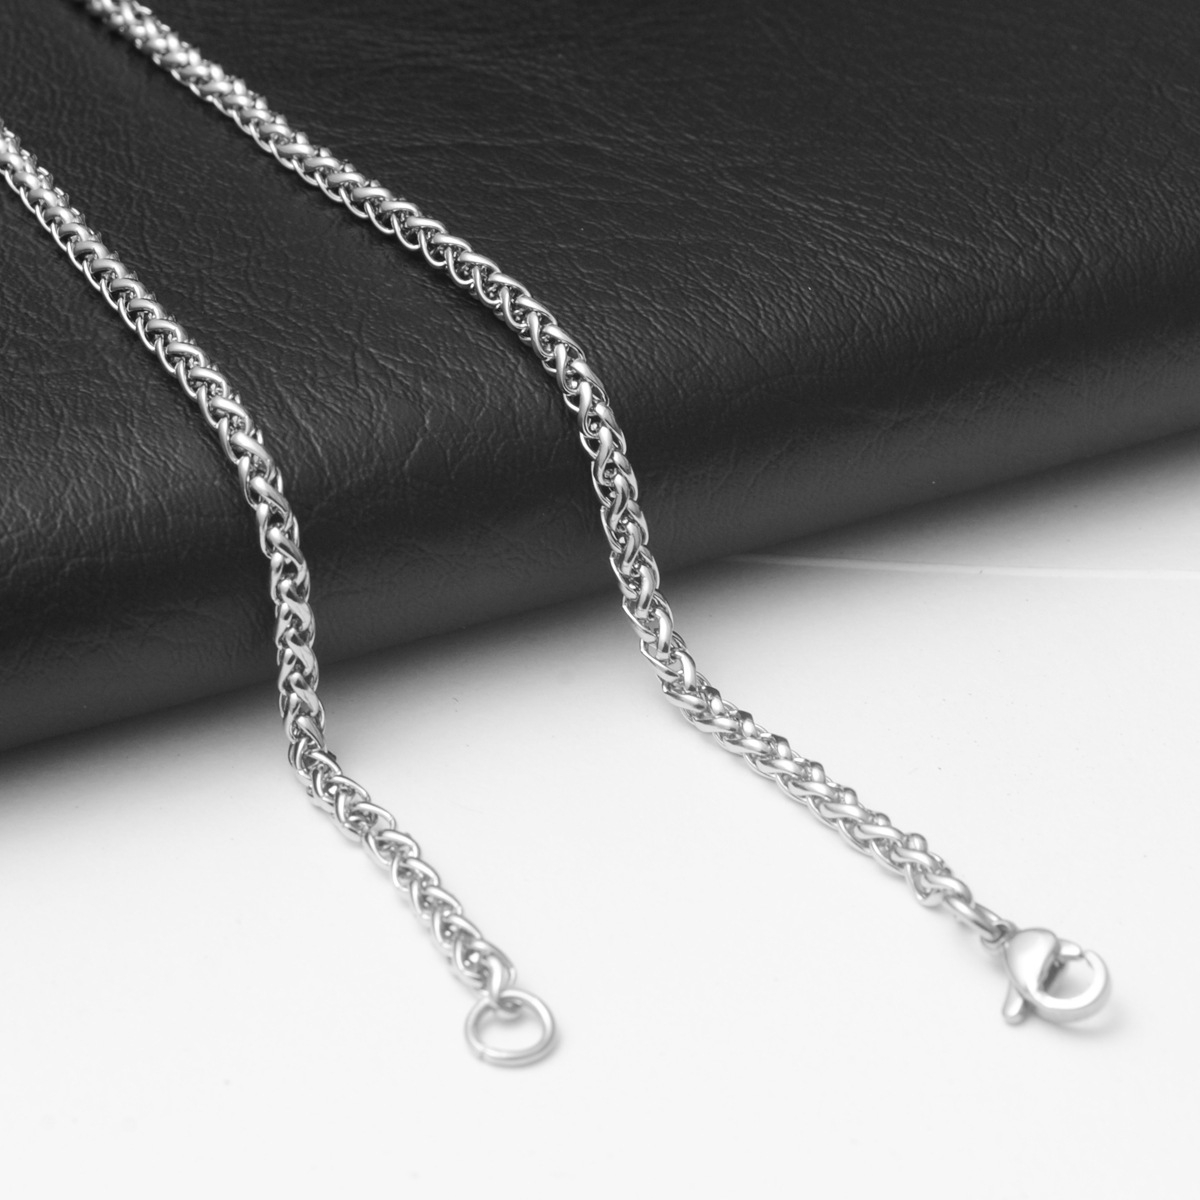 WTBN Stainless Steel Chain Necklace Long Hip Hop for Women Men on The Neck Fashion Jewelry Gift Accessories Silver Color Choker 2.5MM